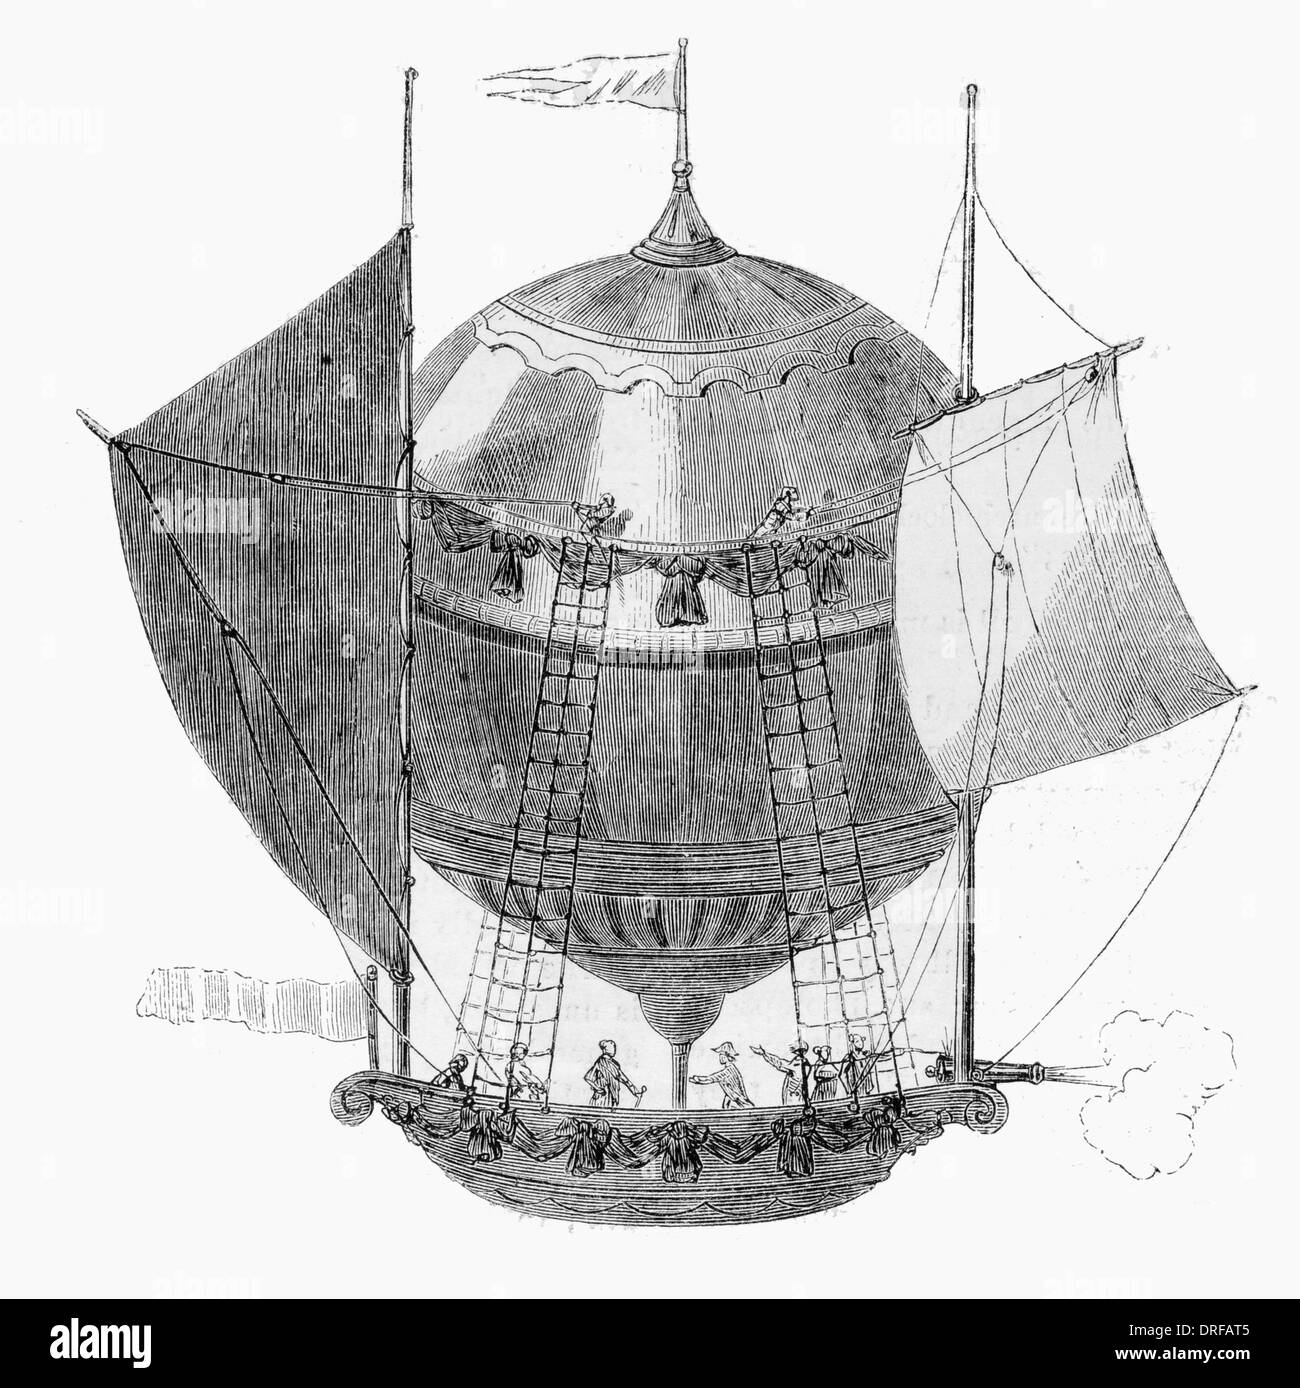 Aerostatic Machine based on a lighter than air gas filled balloon with sails and boat slung underneath circa 1700 Stock Photo